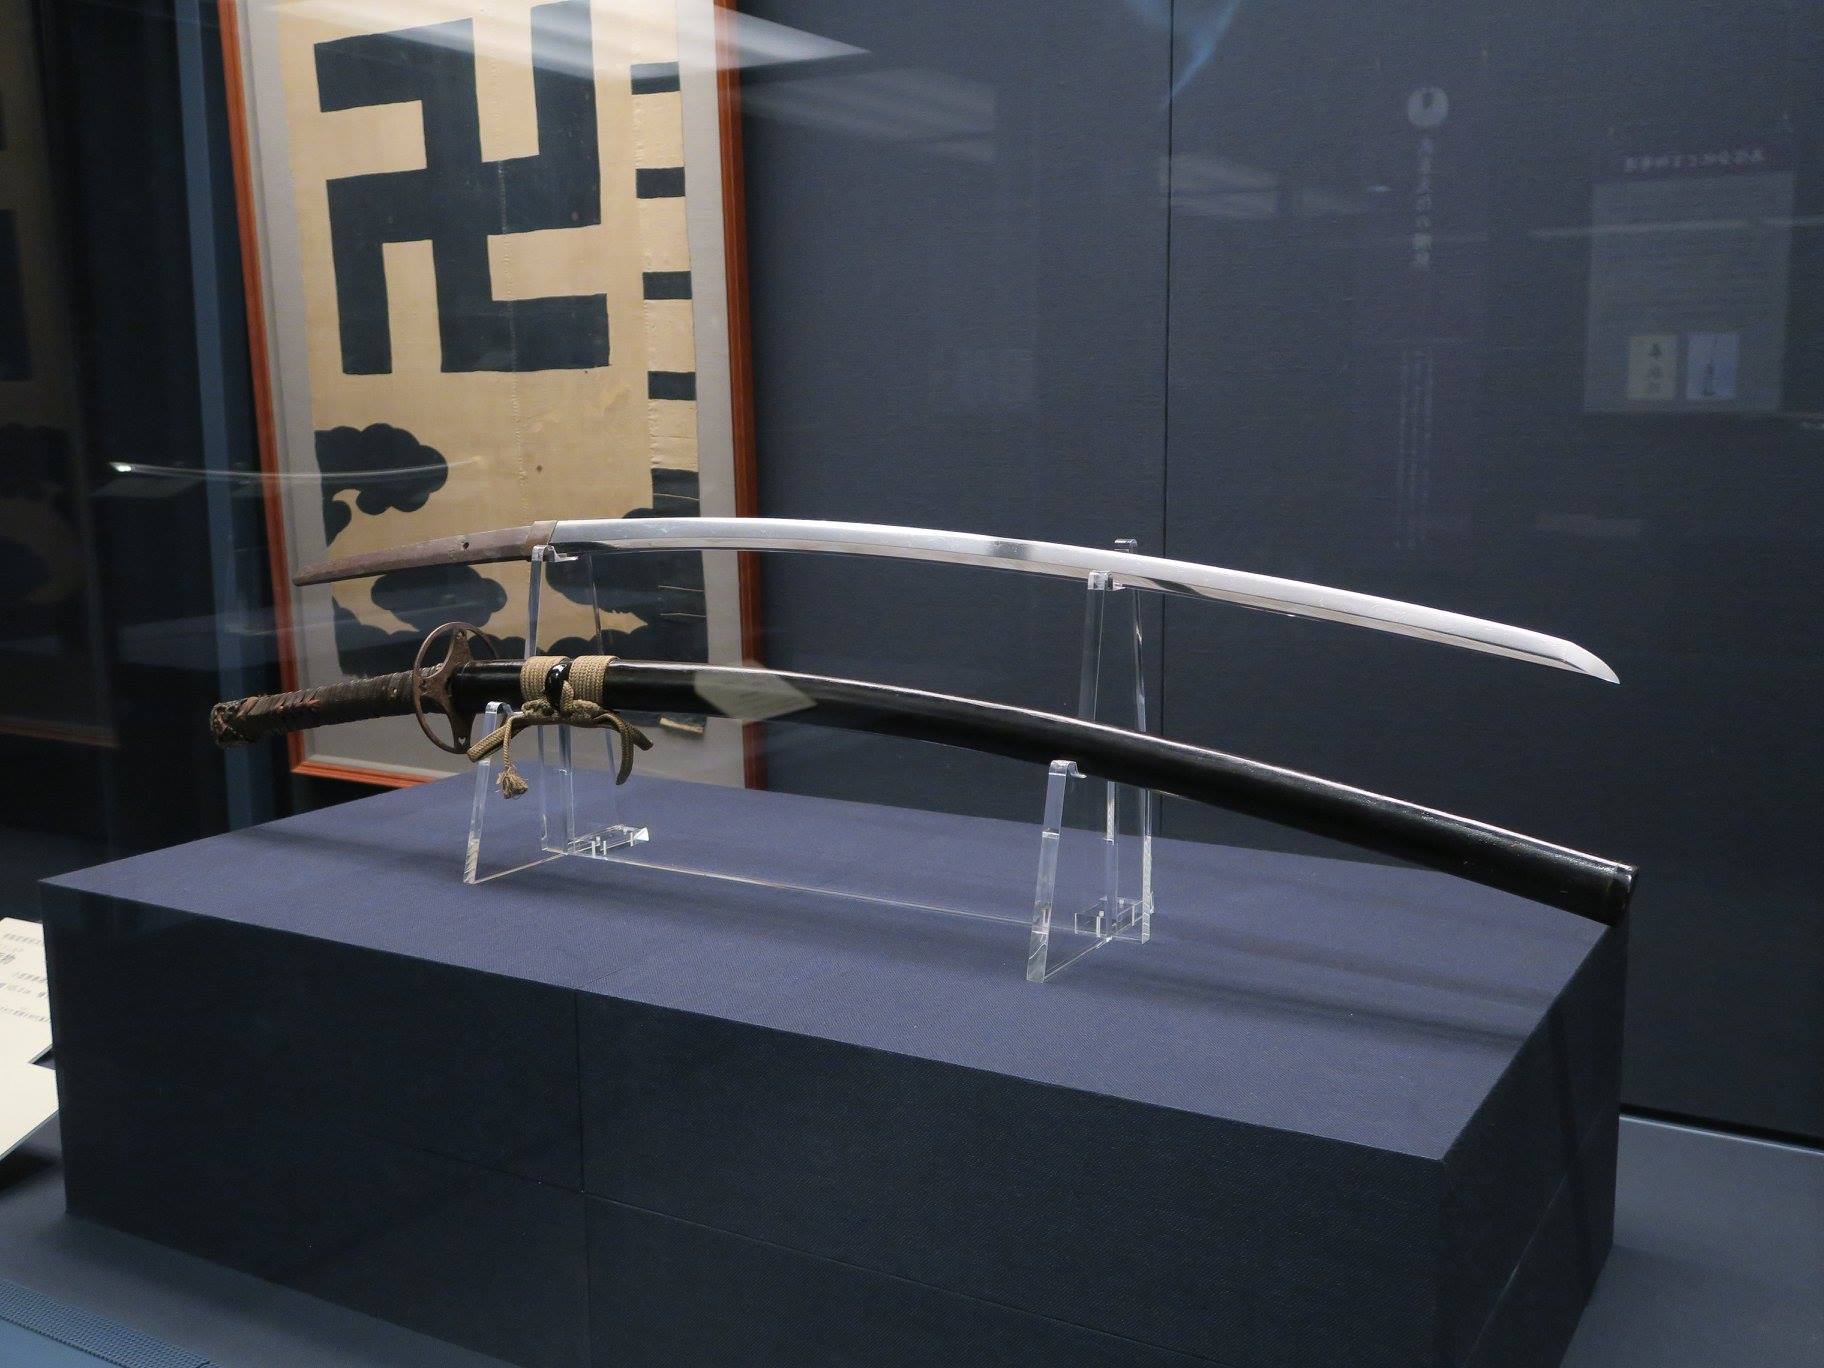 10 Types of Japanese Swords Used By Samurai Warriors